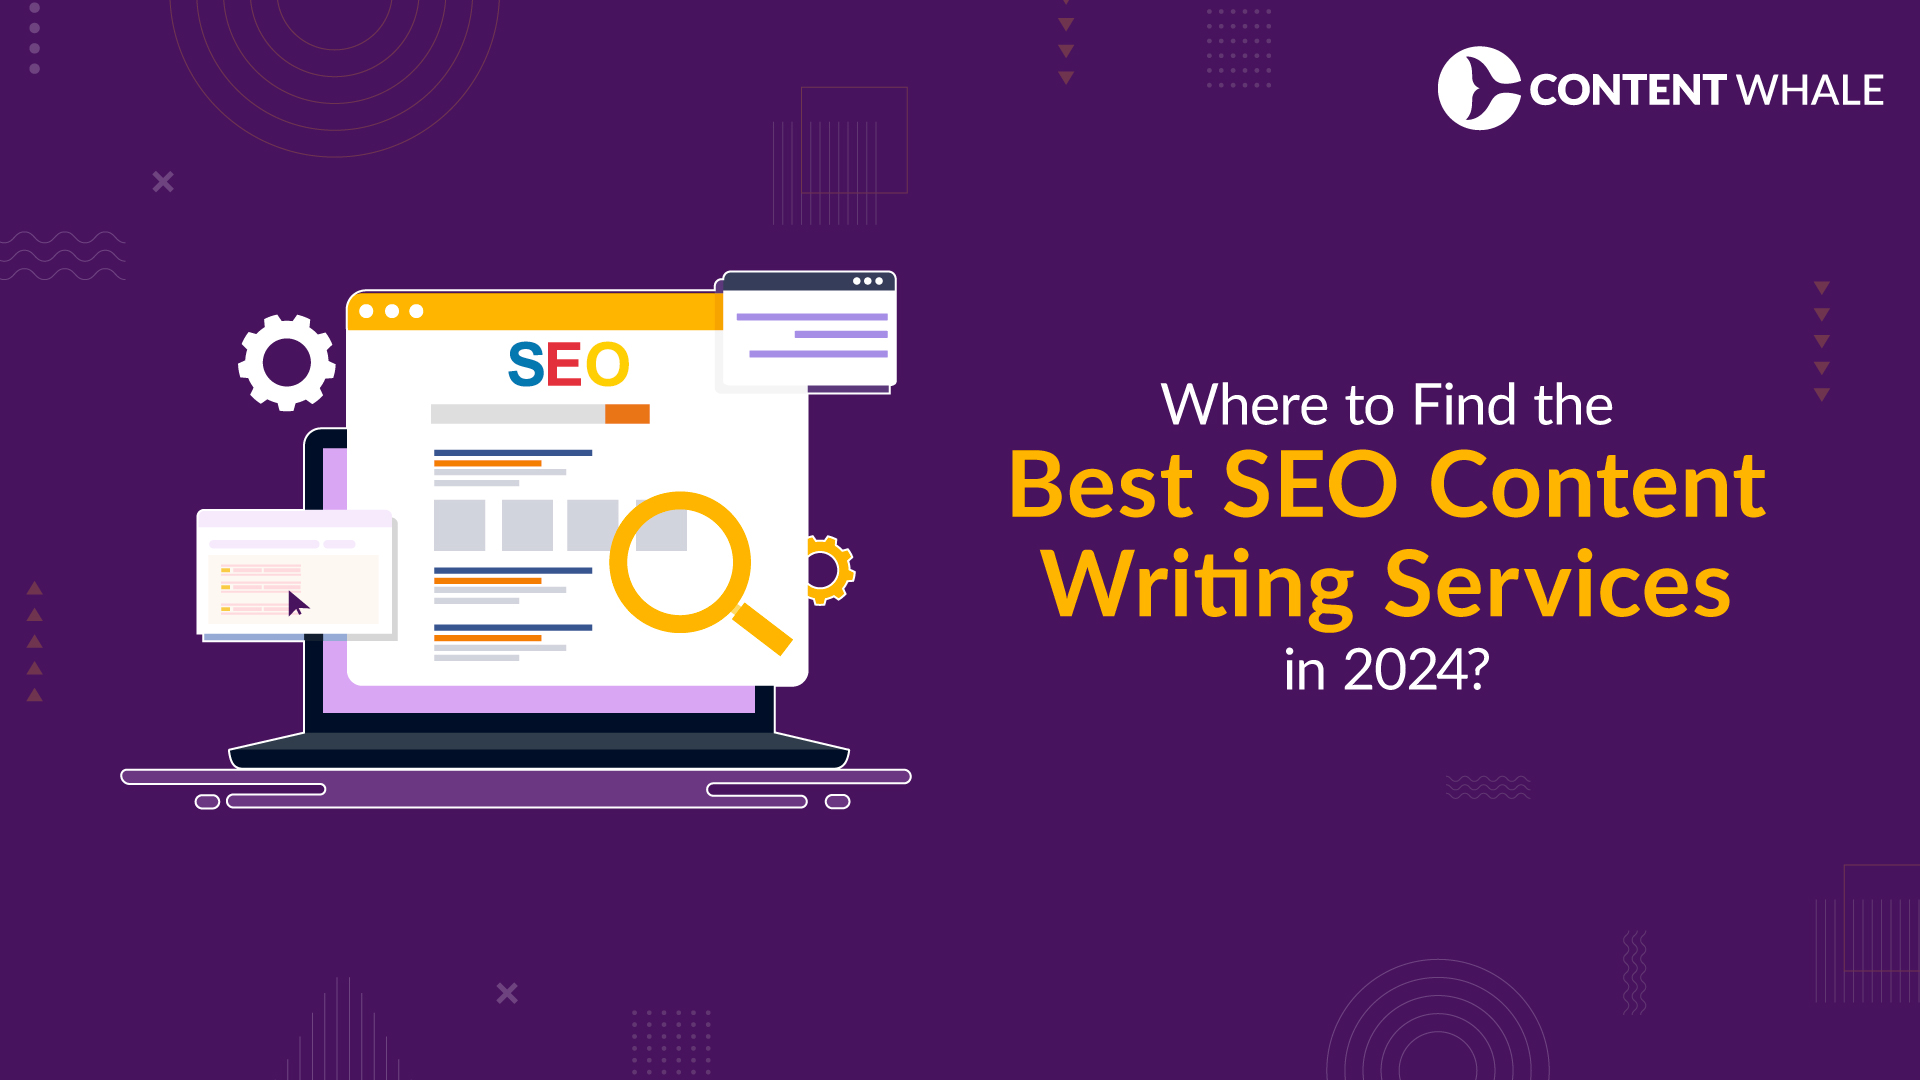 Banner image showcasing title - Where to Find the Best SEO Content Writing Services in 2024?